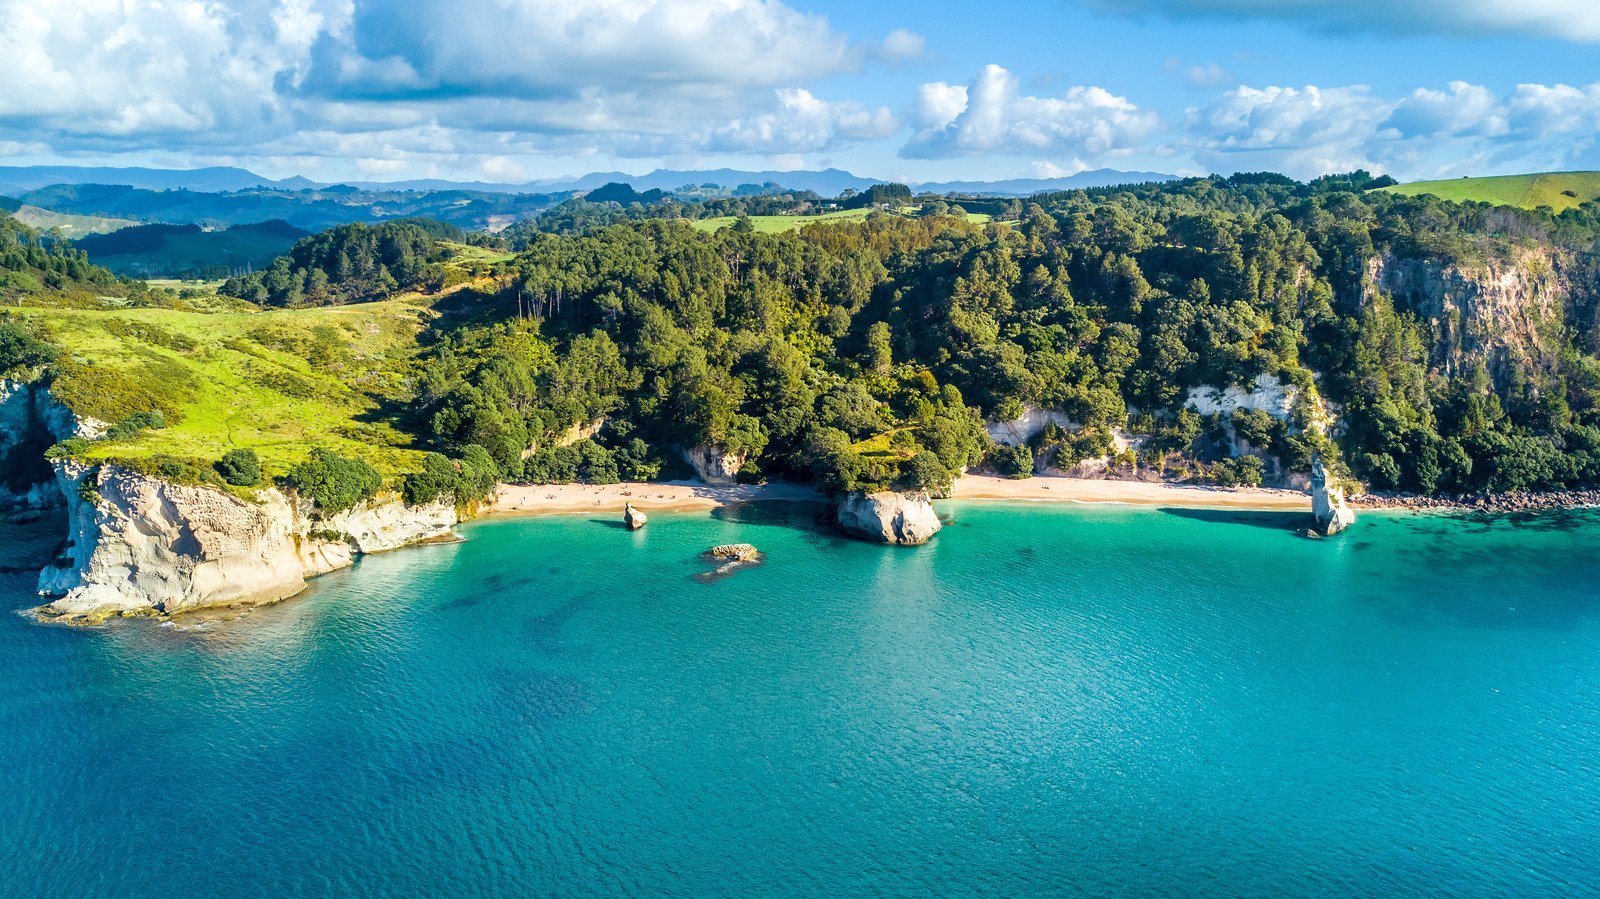 This Stunning Beach Is A Must-Visit When Traveling To New Zealand